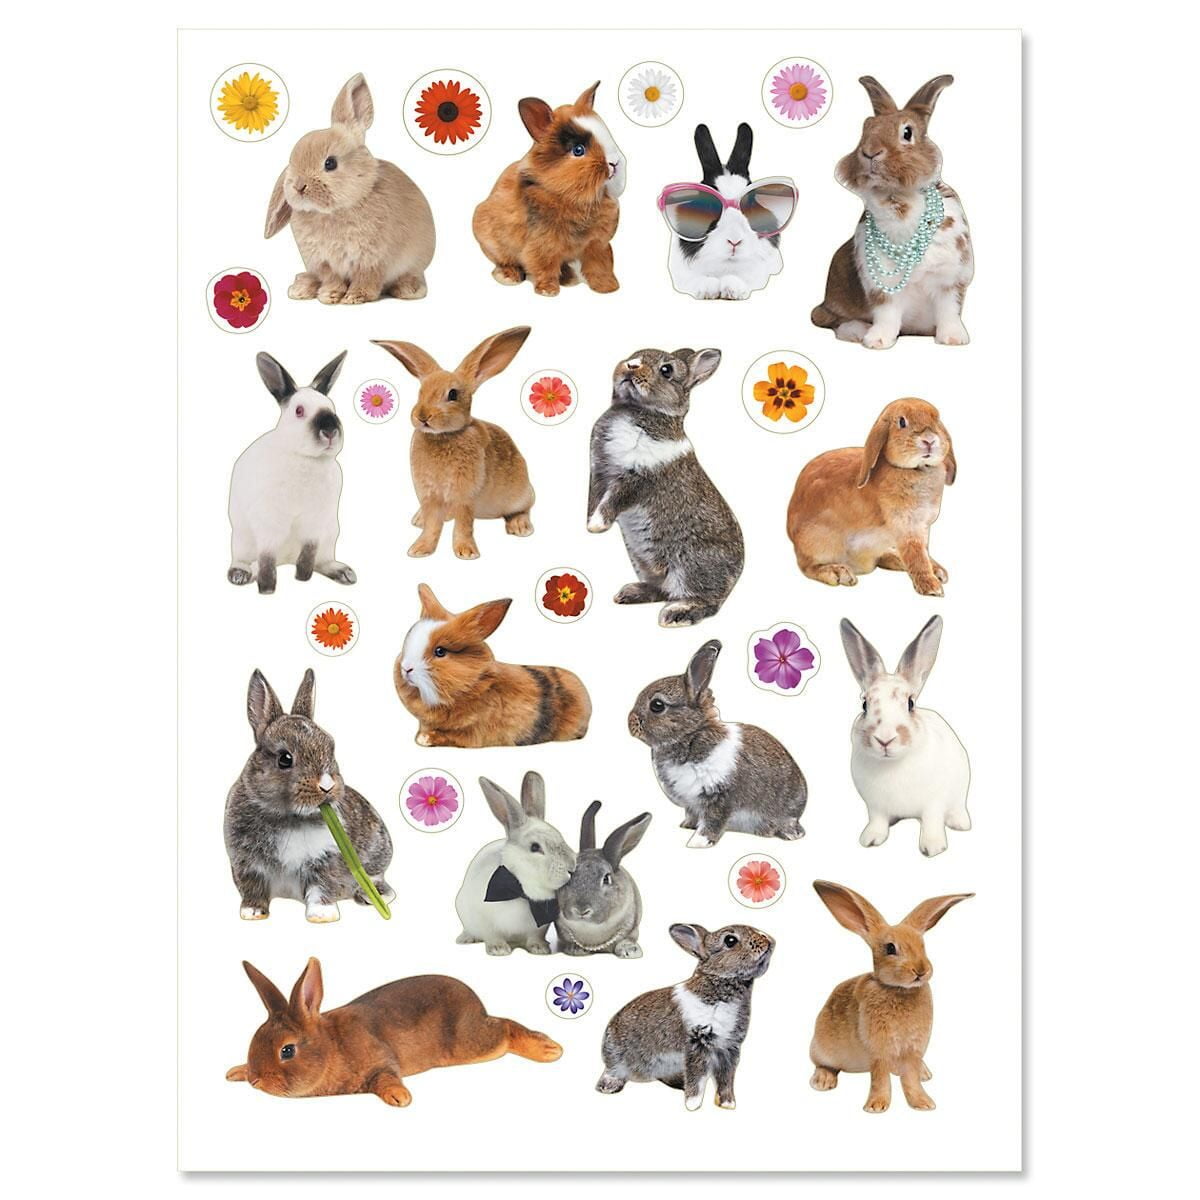 Details about   Happy Easter Egg Bunny Basket Chick Spring Day Hunt Gift Party Sticker Label